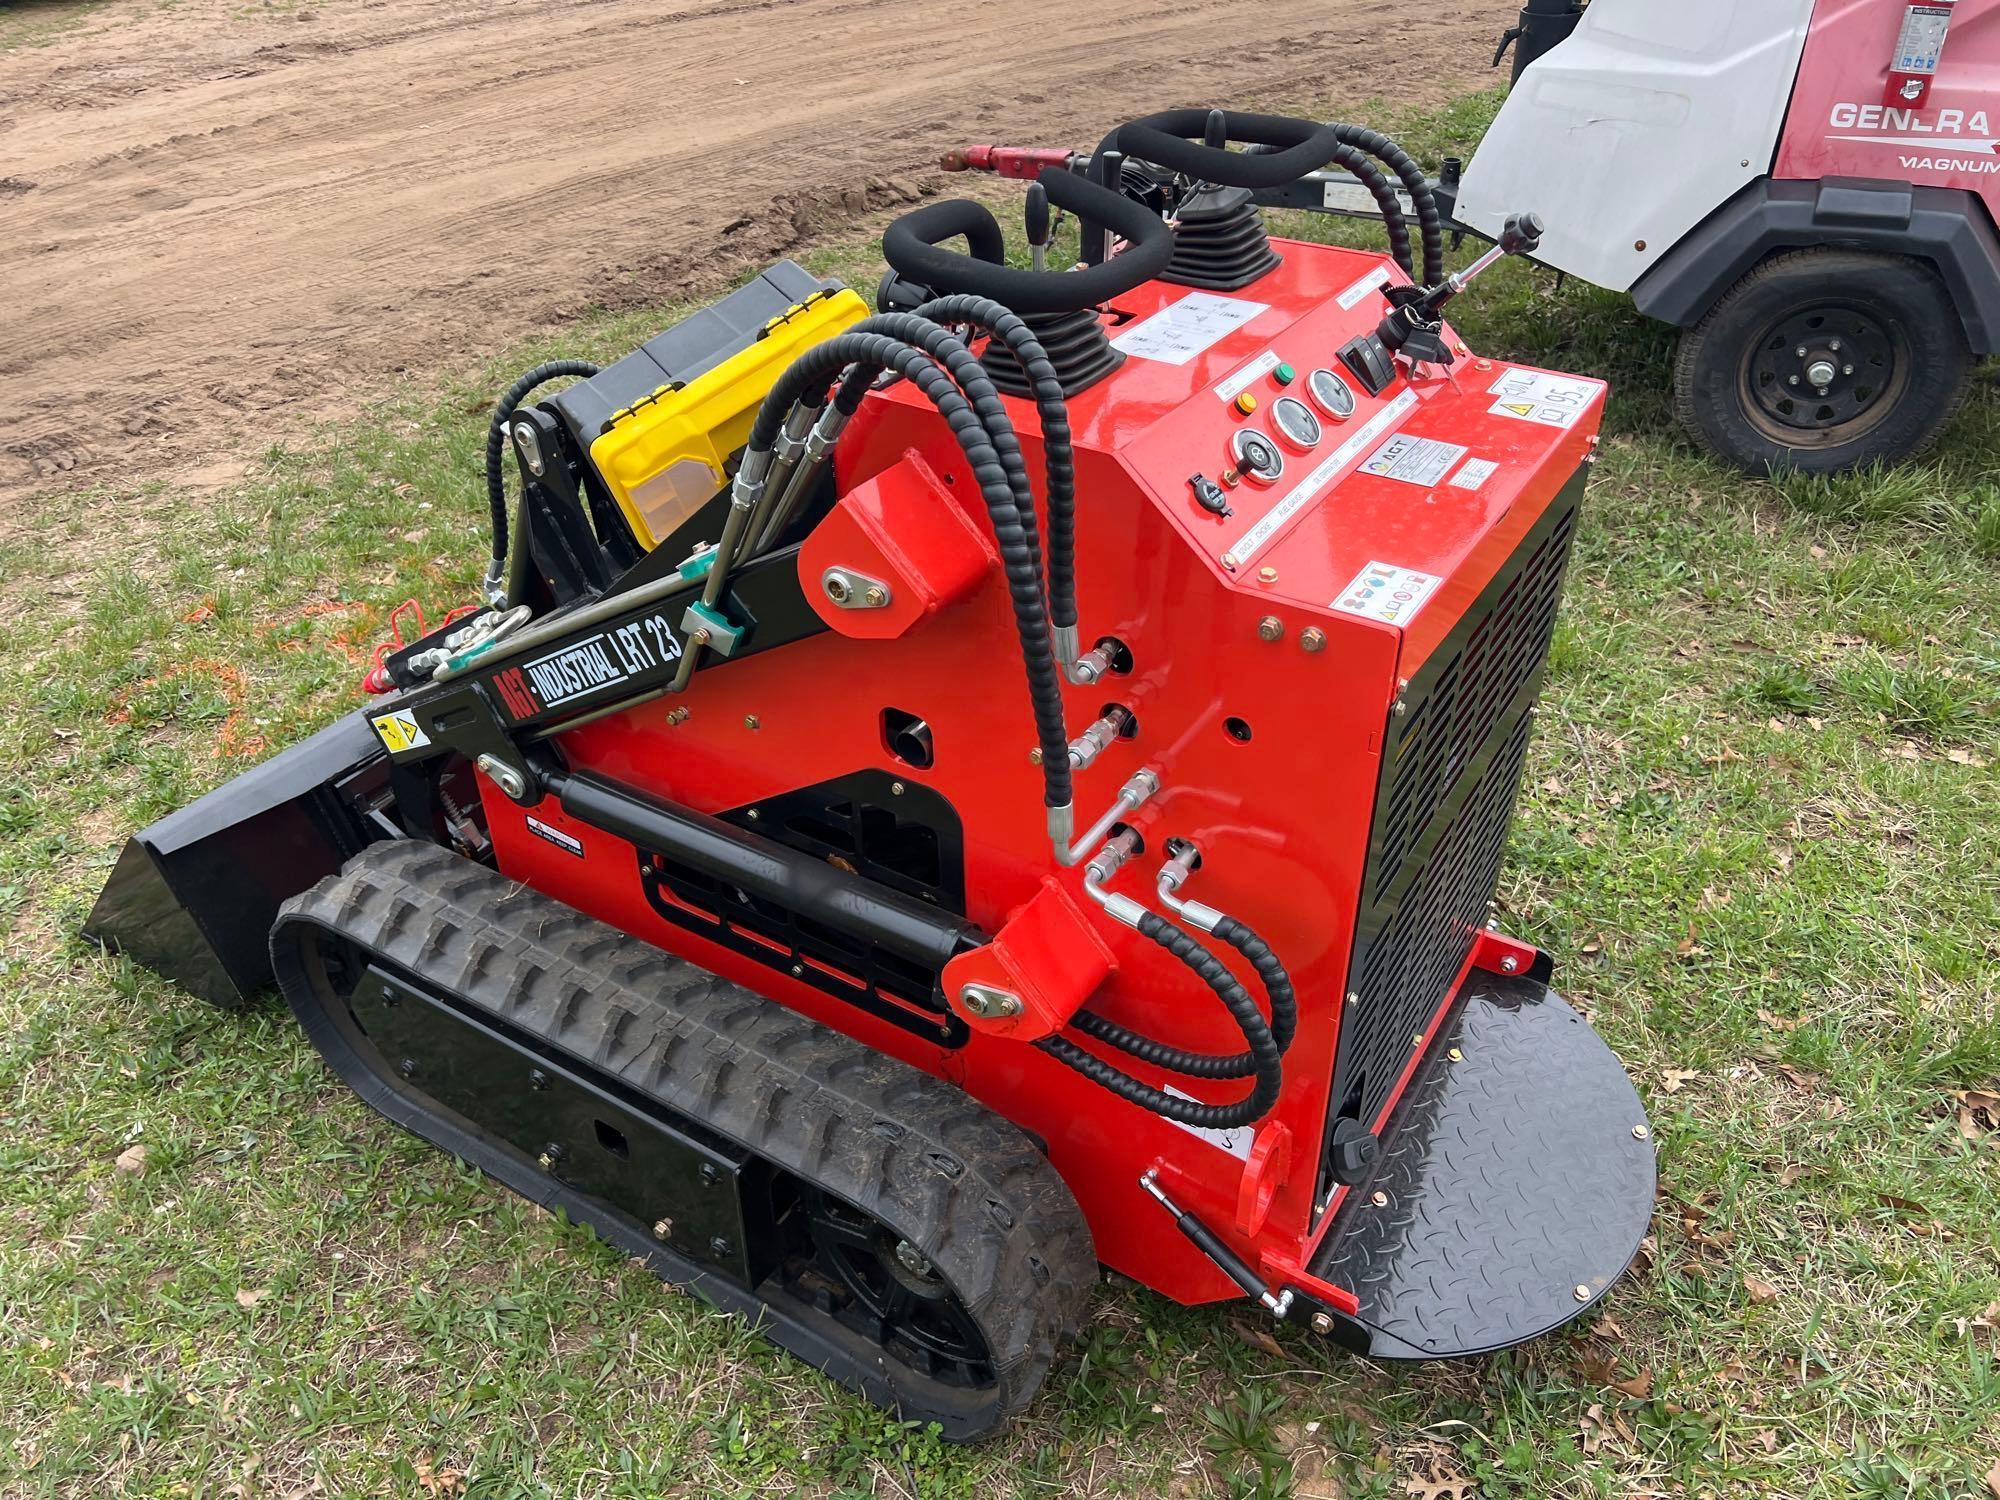 NEW AGROTK LRT23 MINI TRACK LOADER... SN-0661 powered by Briggs & Stratton gas engine, 23HP, rubber